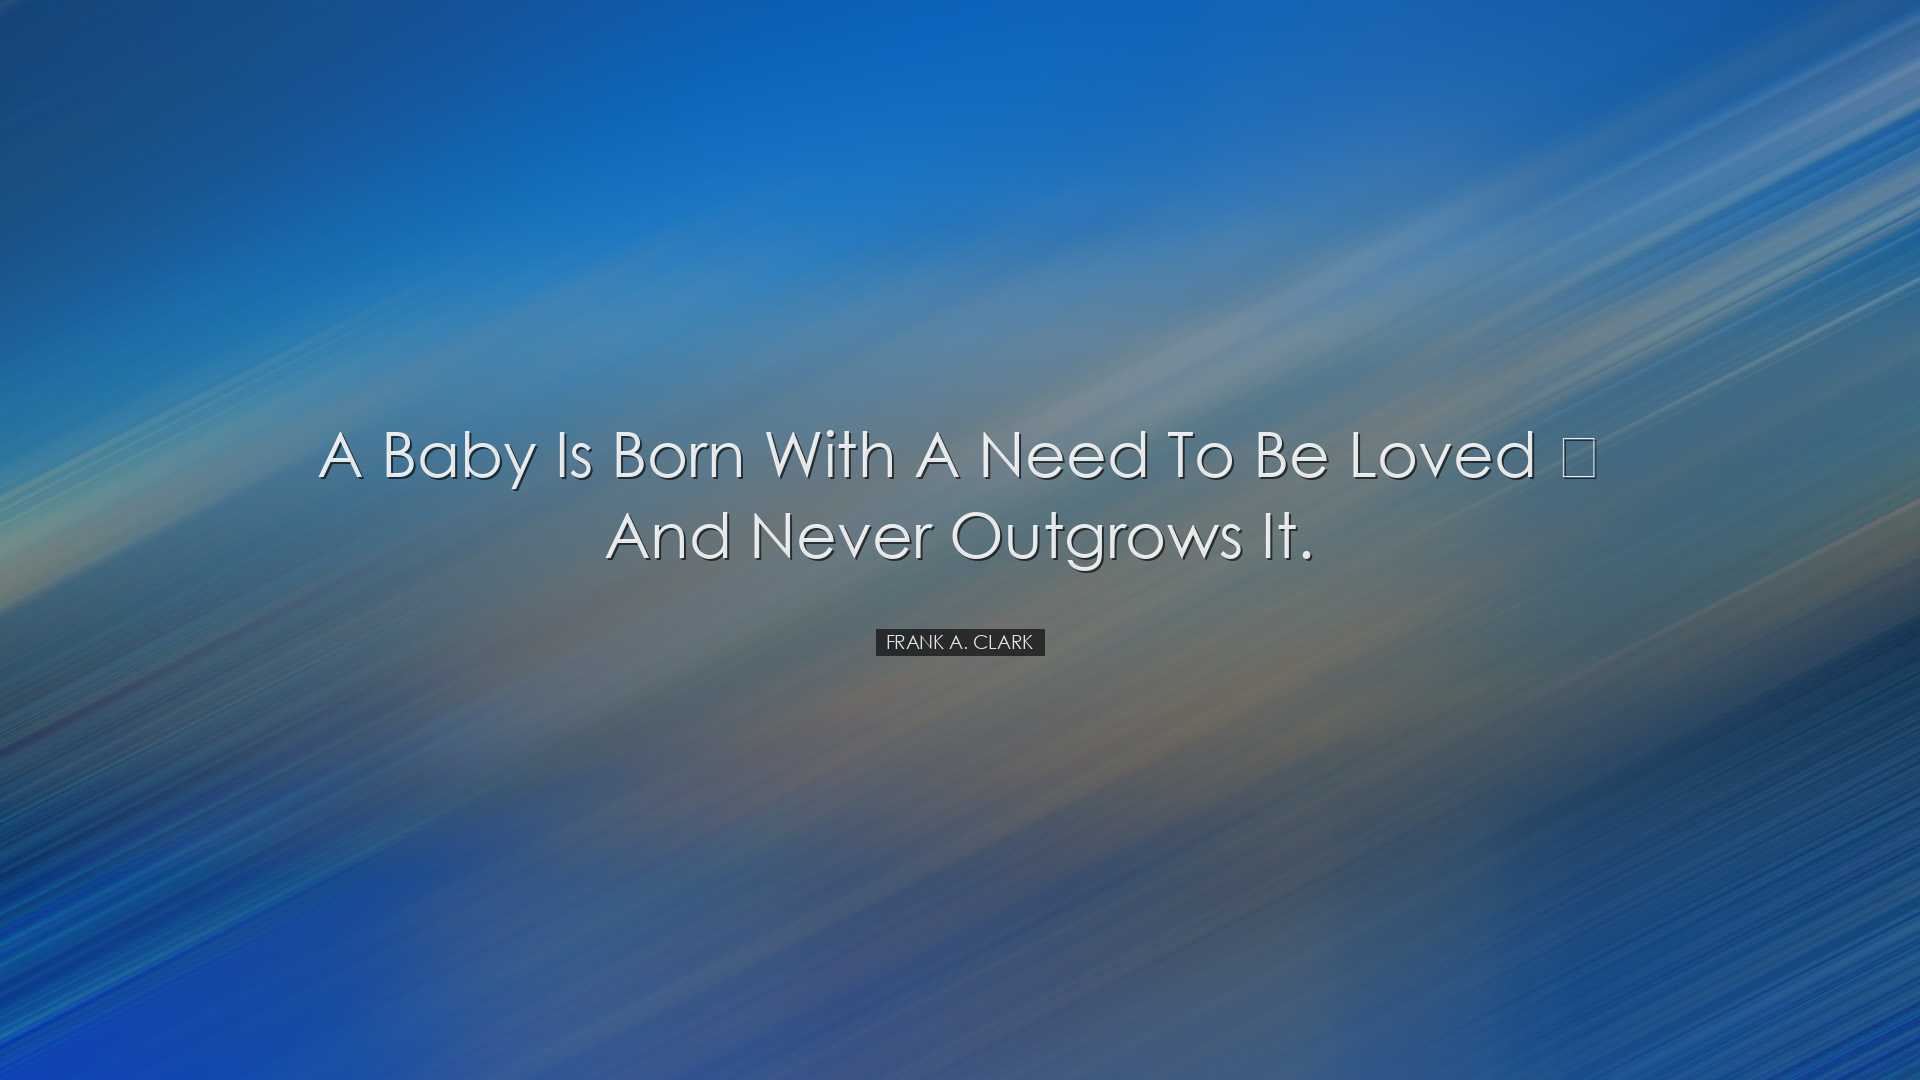 A baby is born with a need to be loved — and never outgrows it.